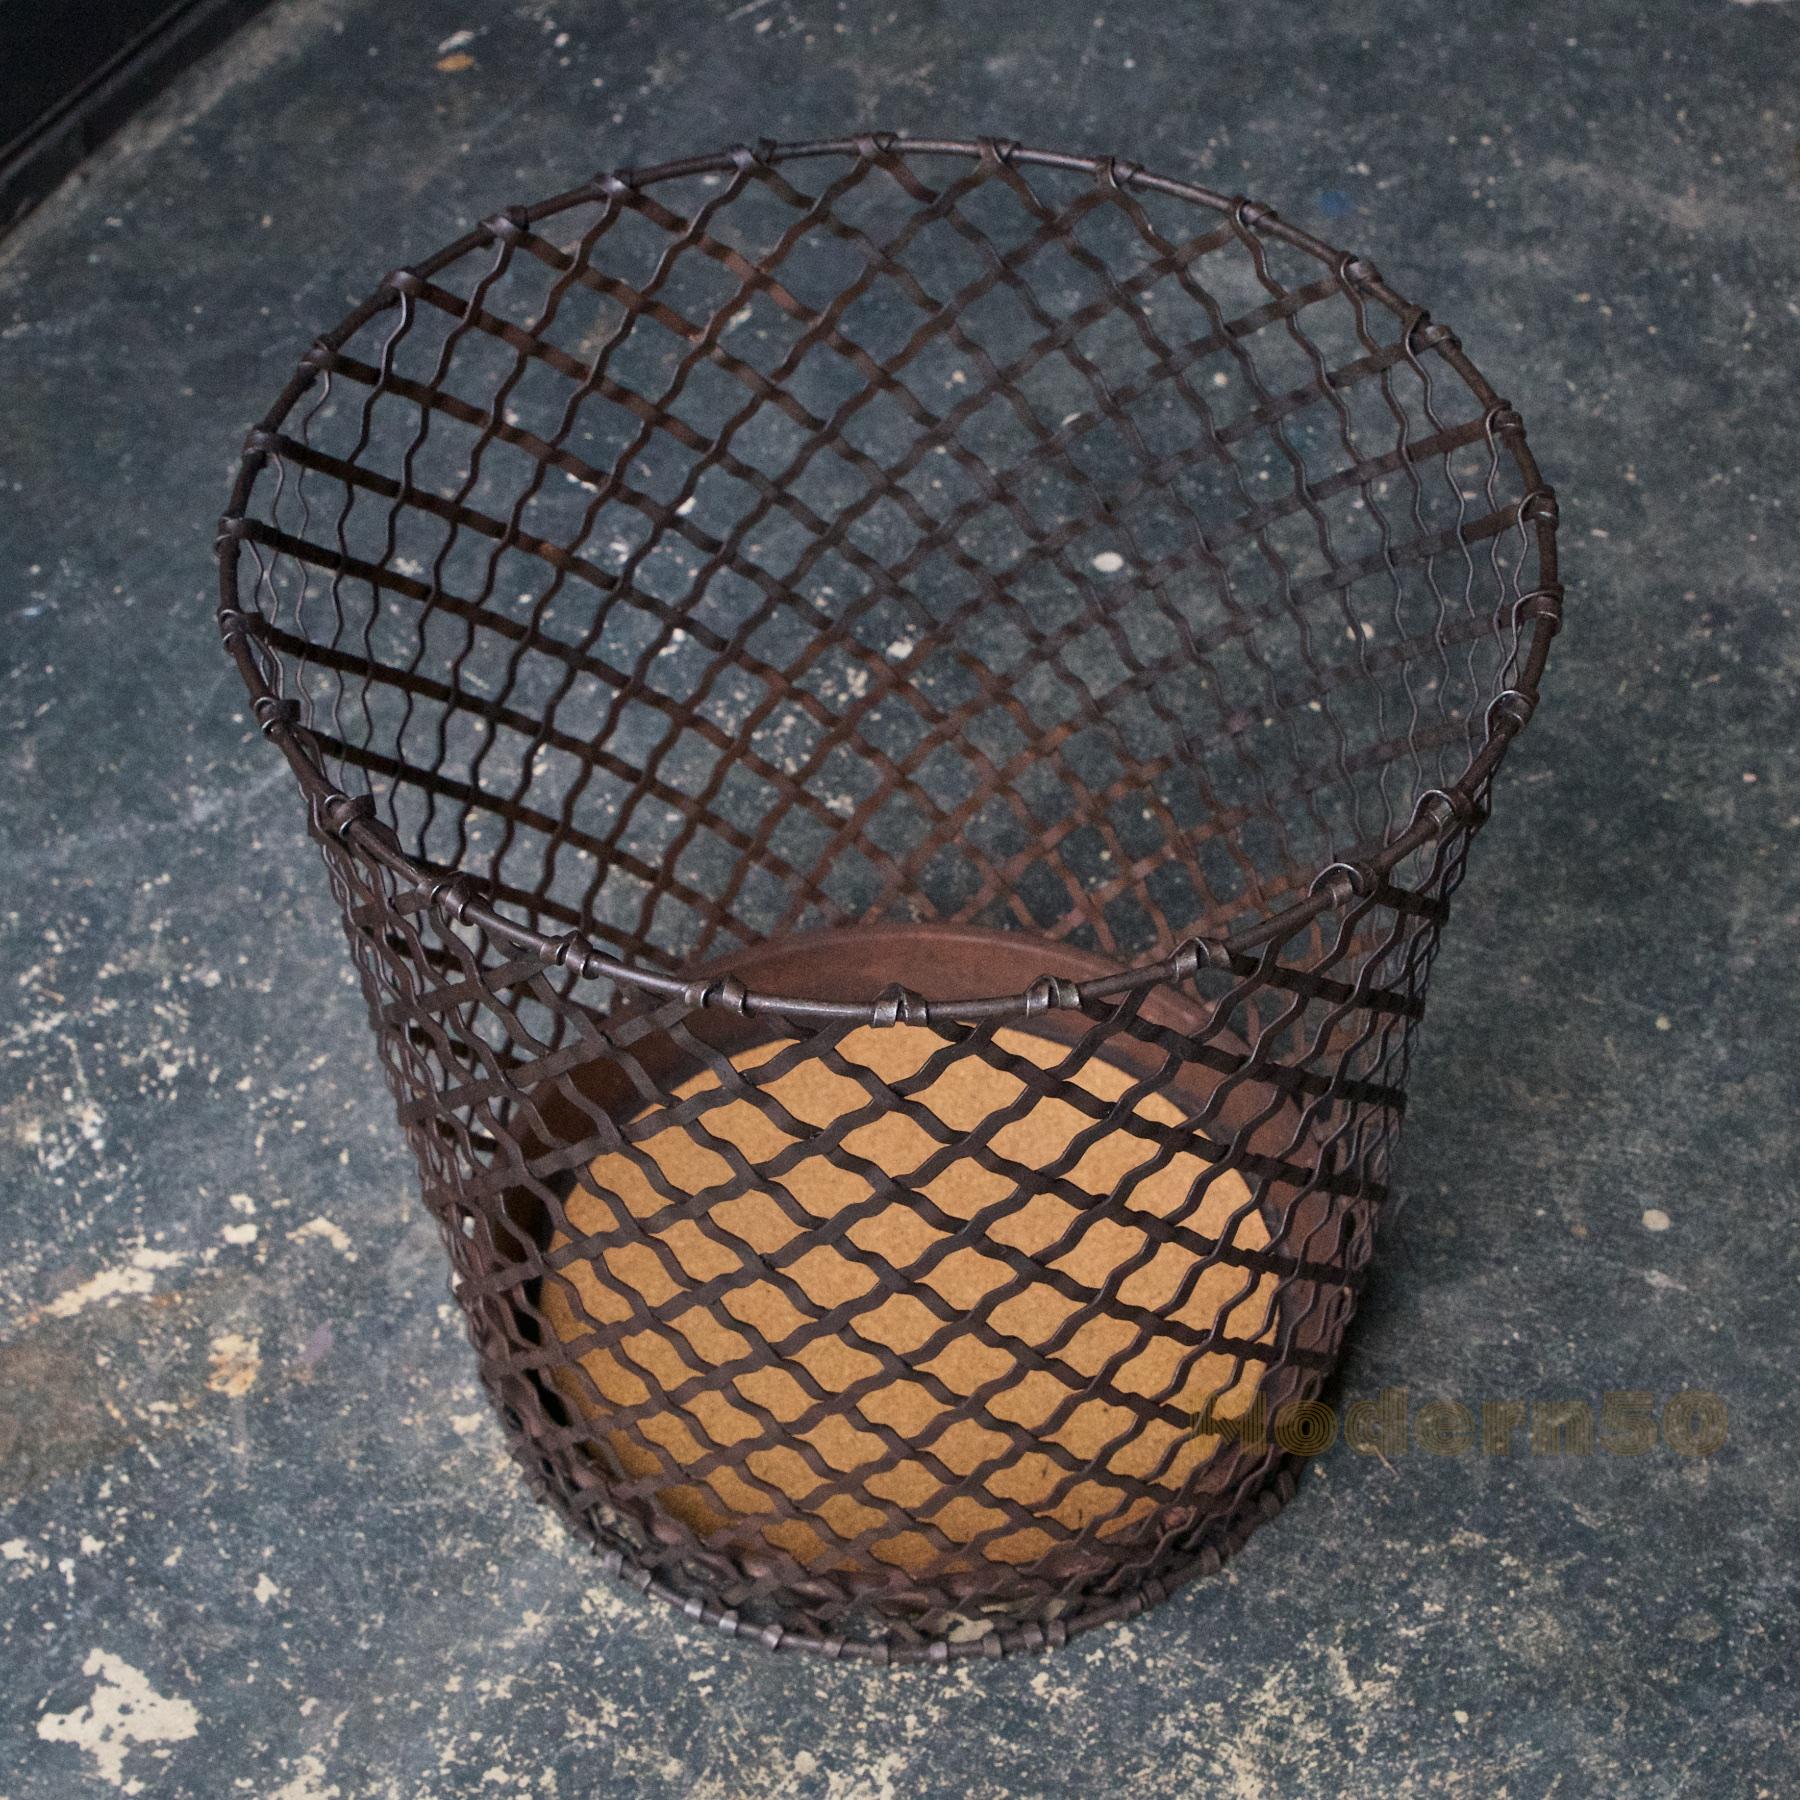 A wonderful American Industrial Age relic. A woven steel lattice trash can, no makers markings. We have Inlayed a new cork bottom to seal the metal bottom, which has some holes from rust, but remains structurally sound.